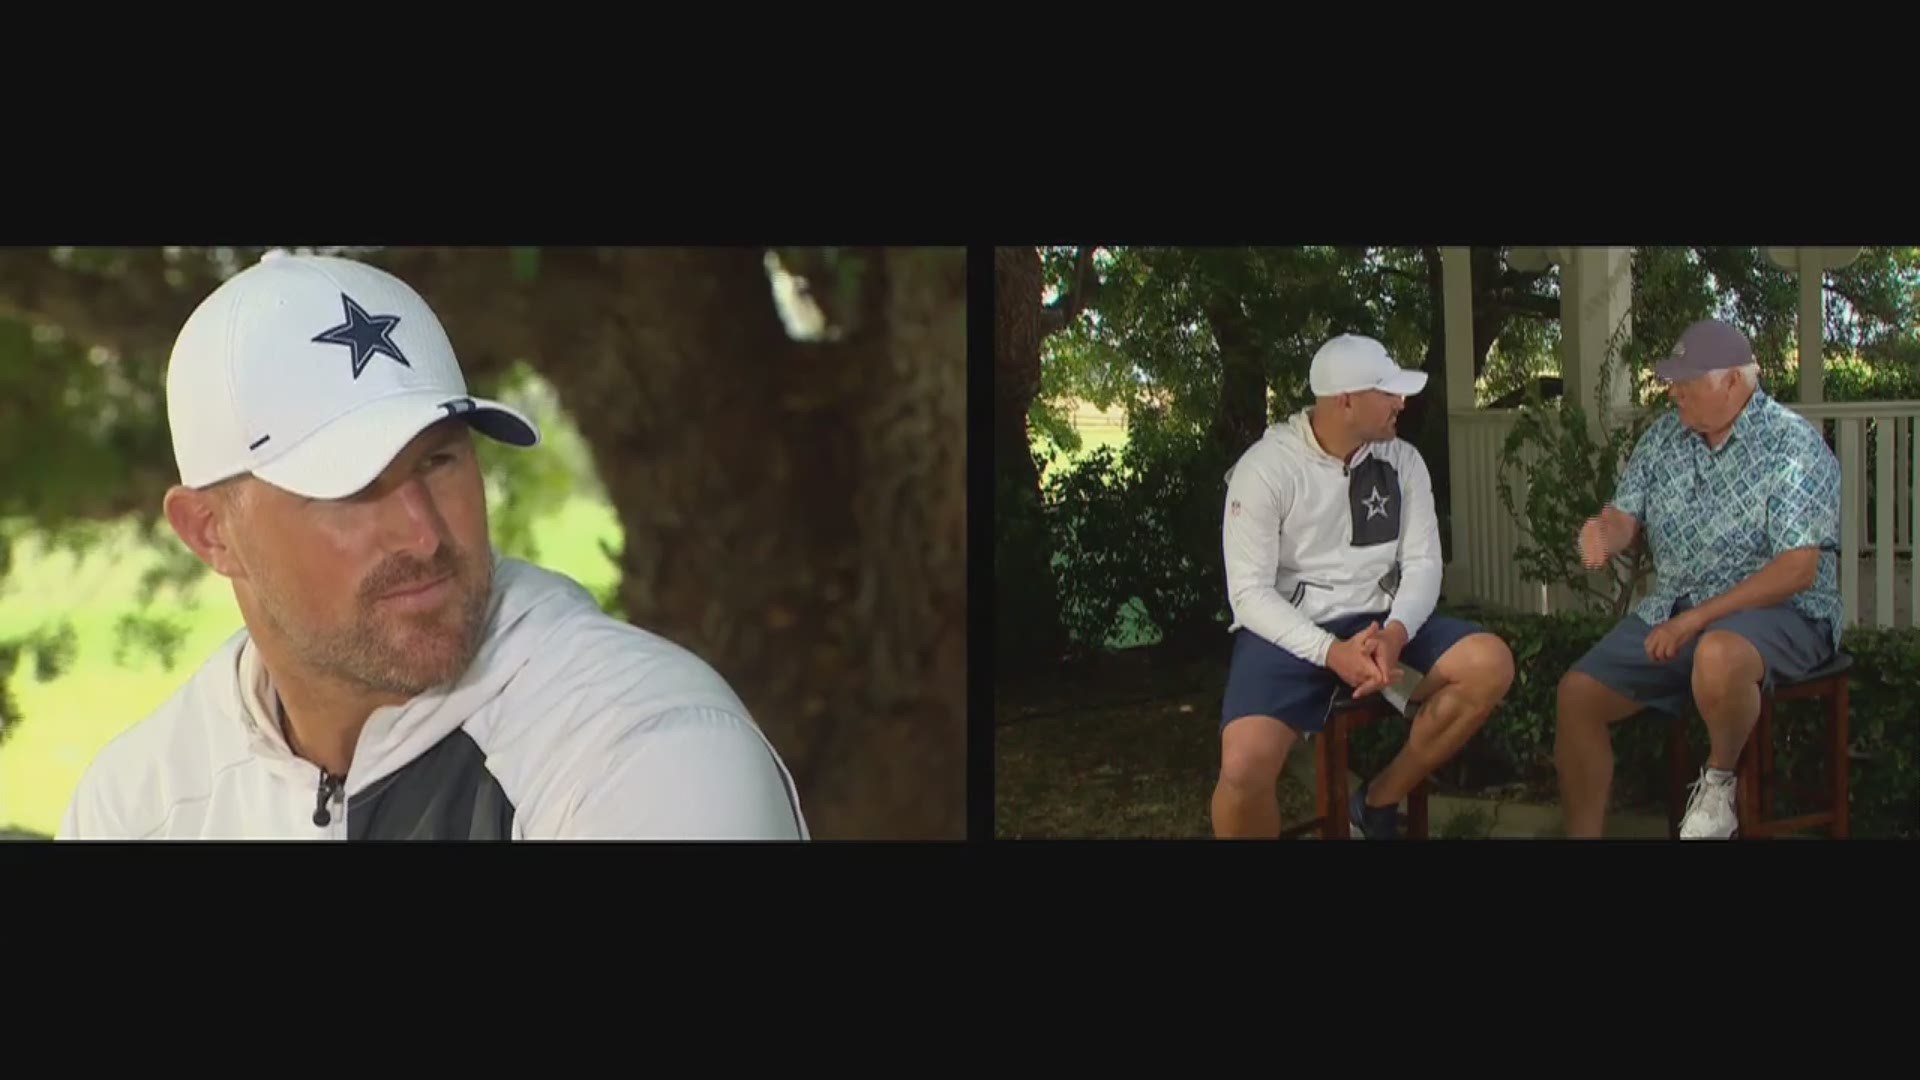 Jason Witten sits down to talk with Dale.